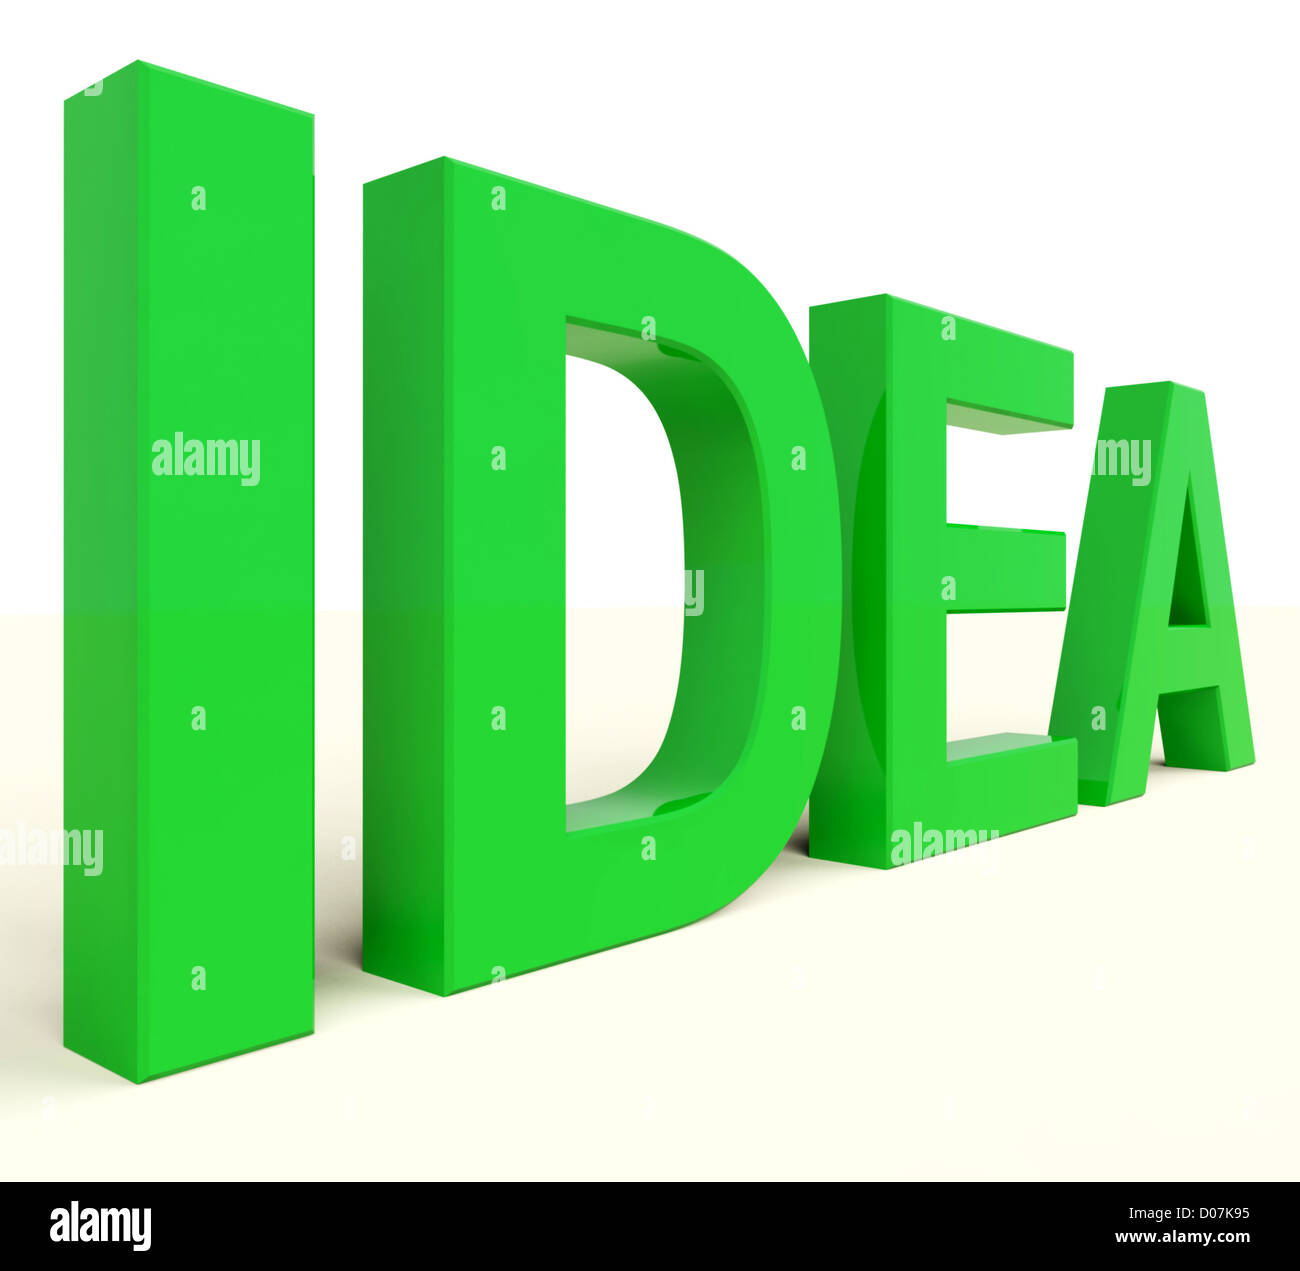 Idea Word In Green Showing Concept And Creativity Stock Photo